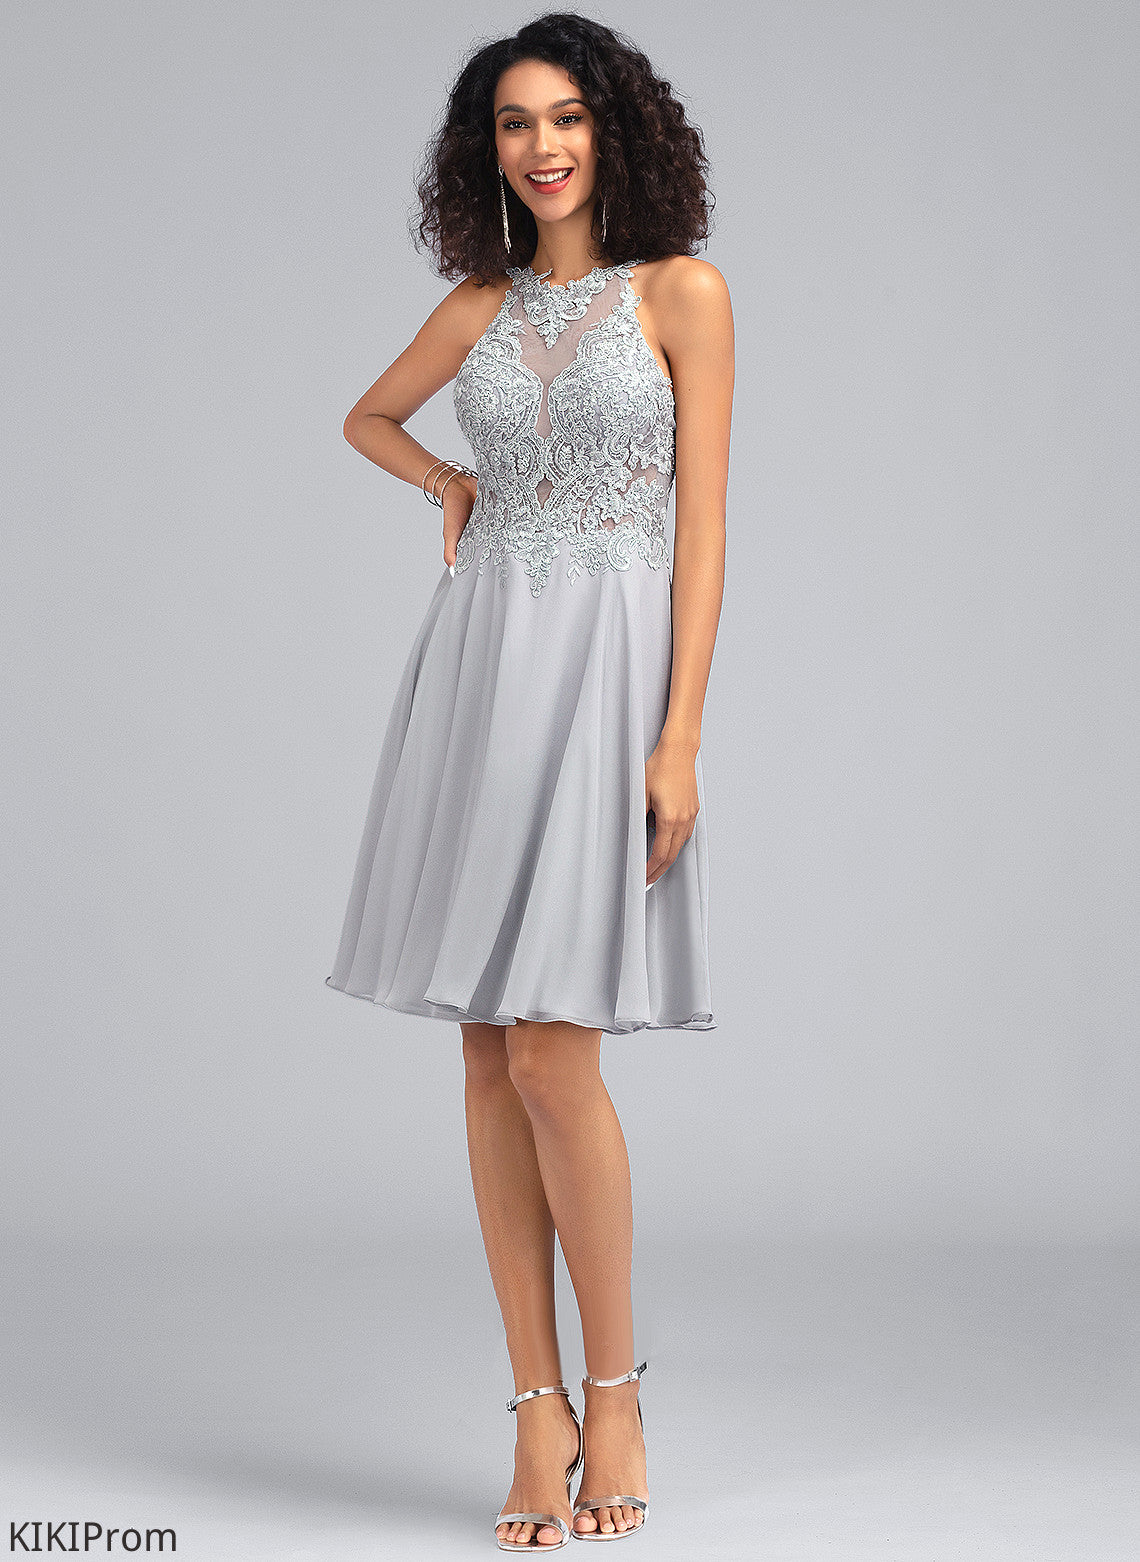 Scoop Cocktail A-Line Lace Chiffon Knee-Length With Dress Marilyn Neck Cocktail Dresses Sequins